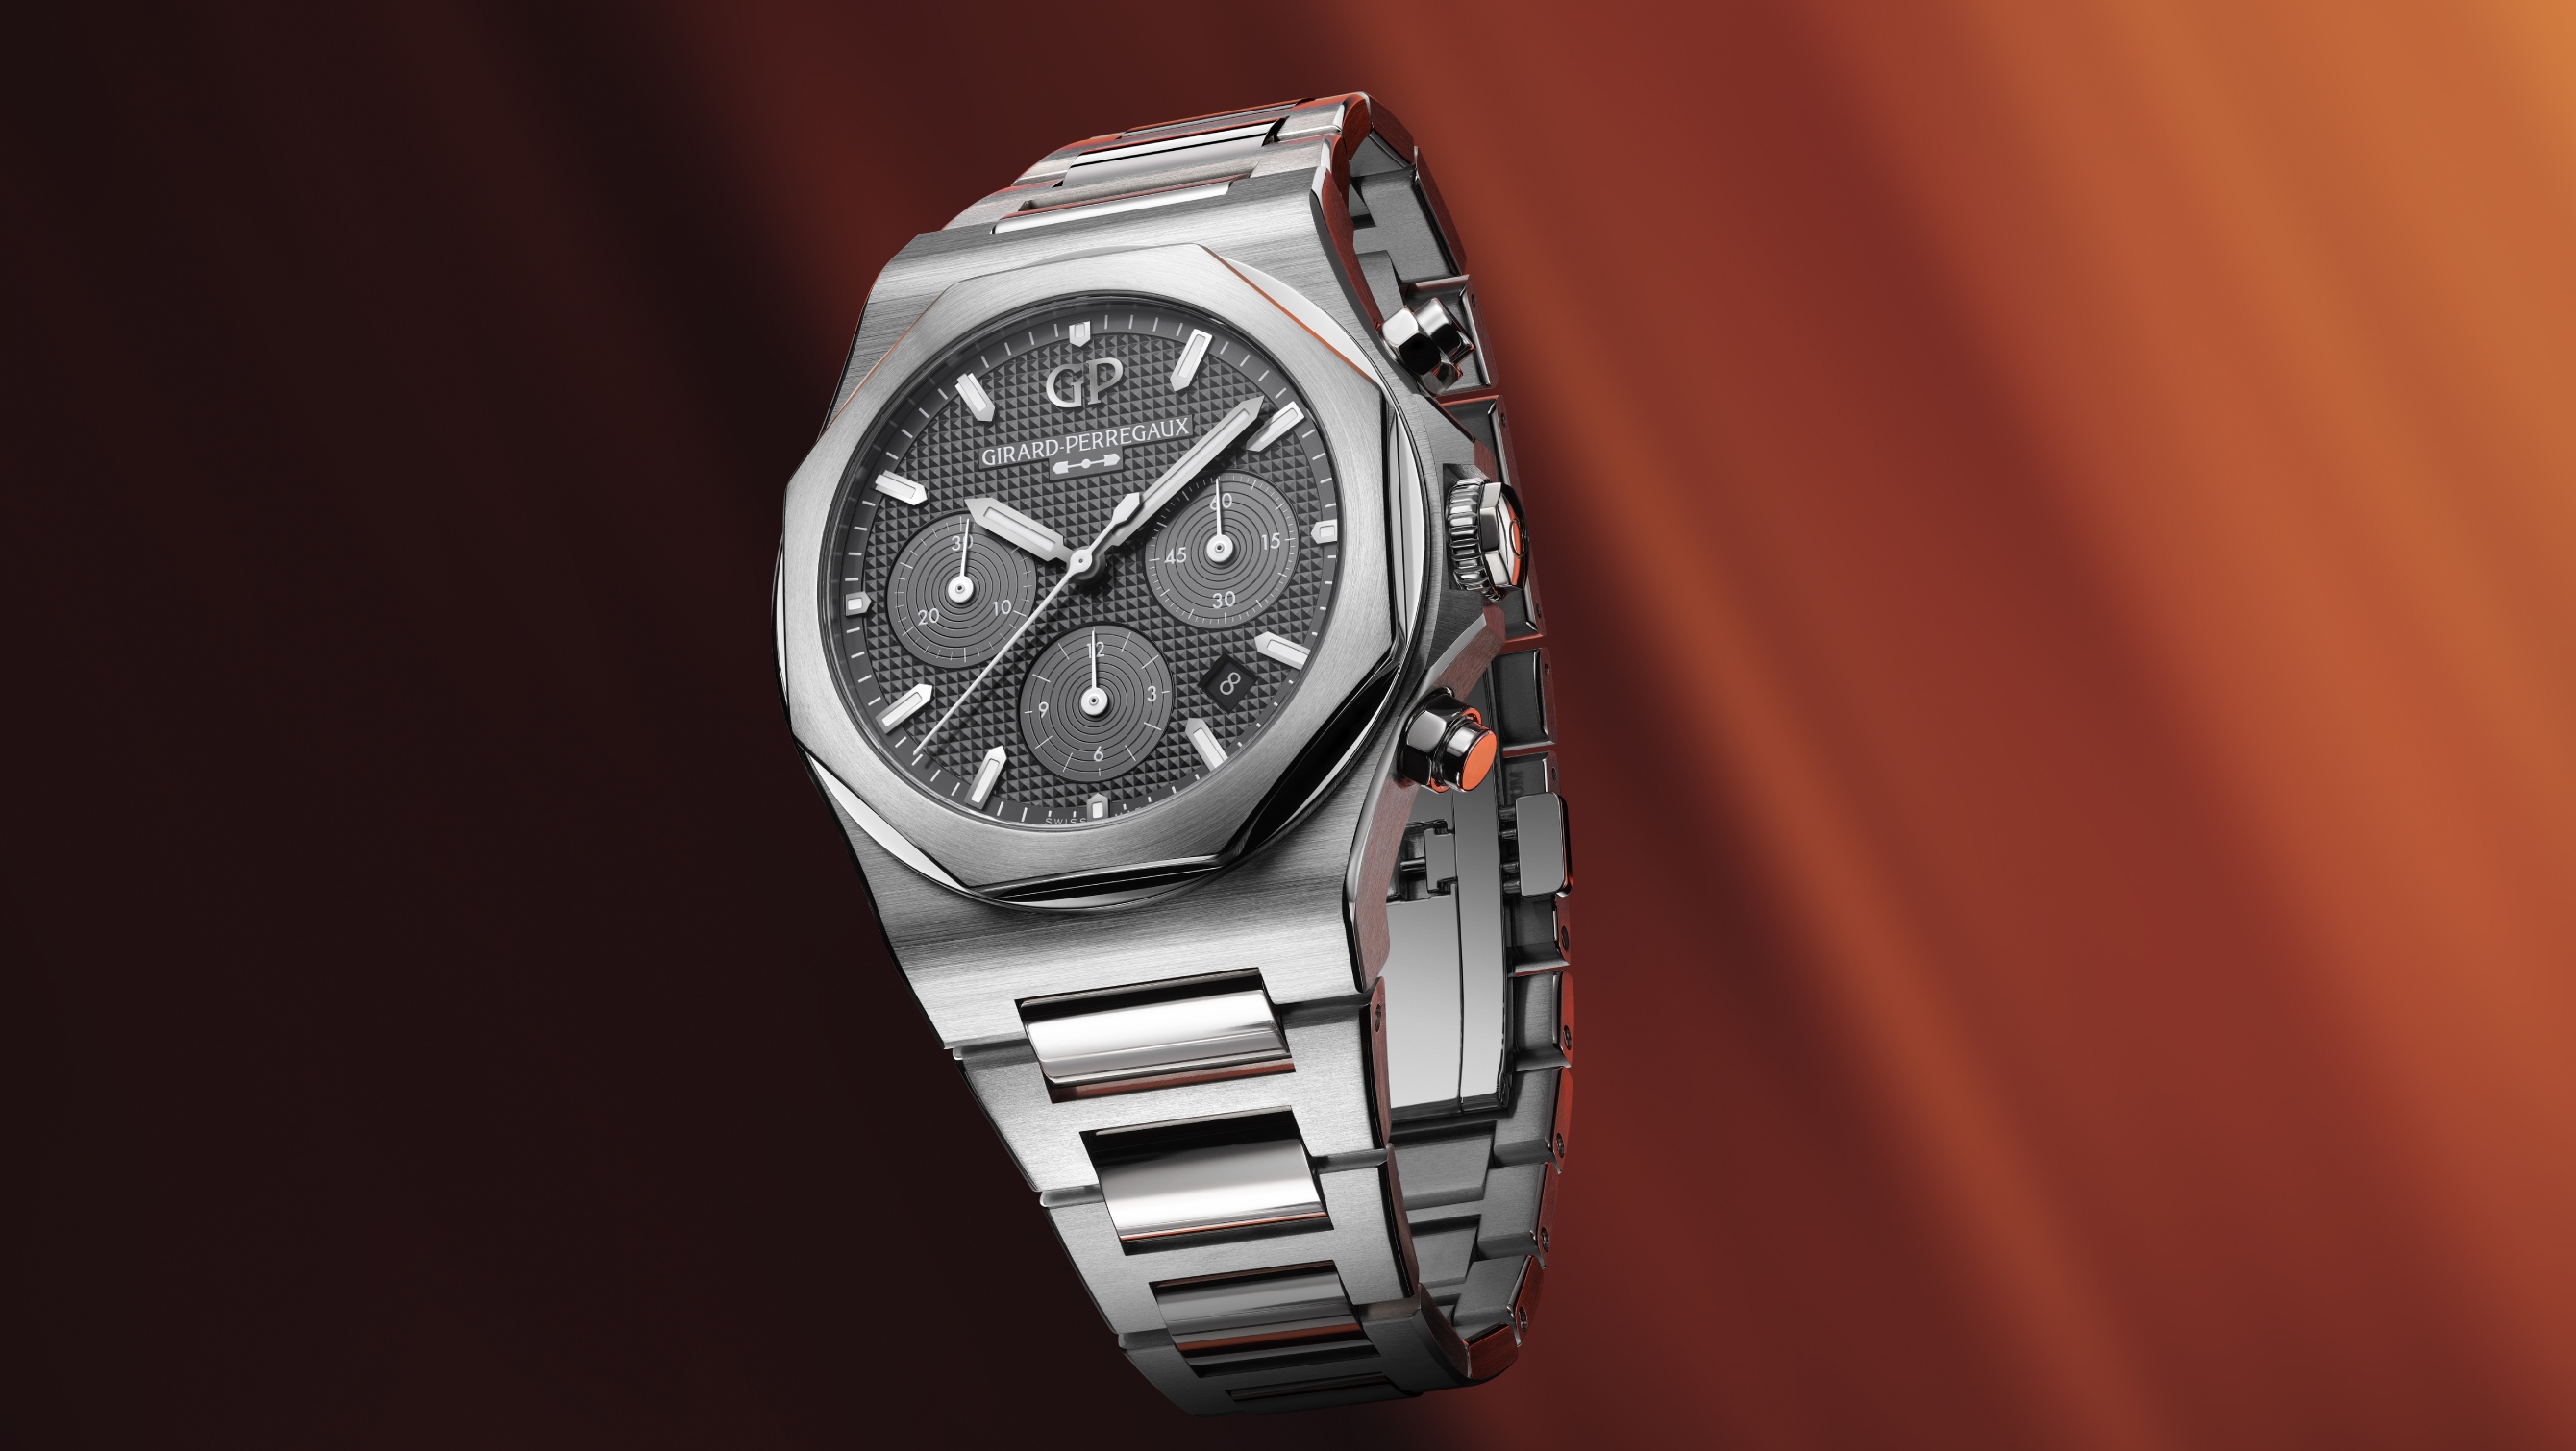 The sporty Girard-Perregaux Laureato Chronograph Ti49 is the first-ever titanium Laureato reference